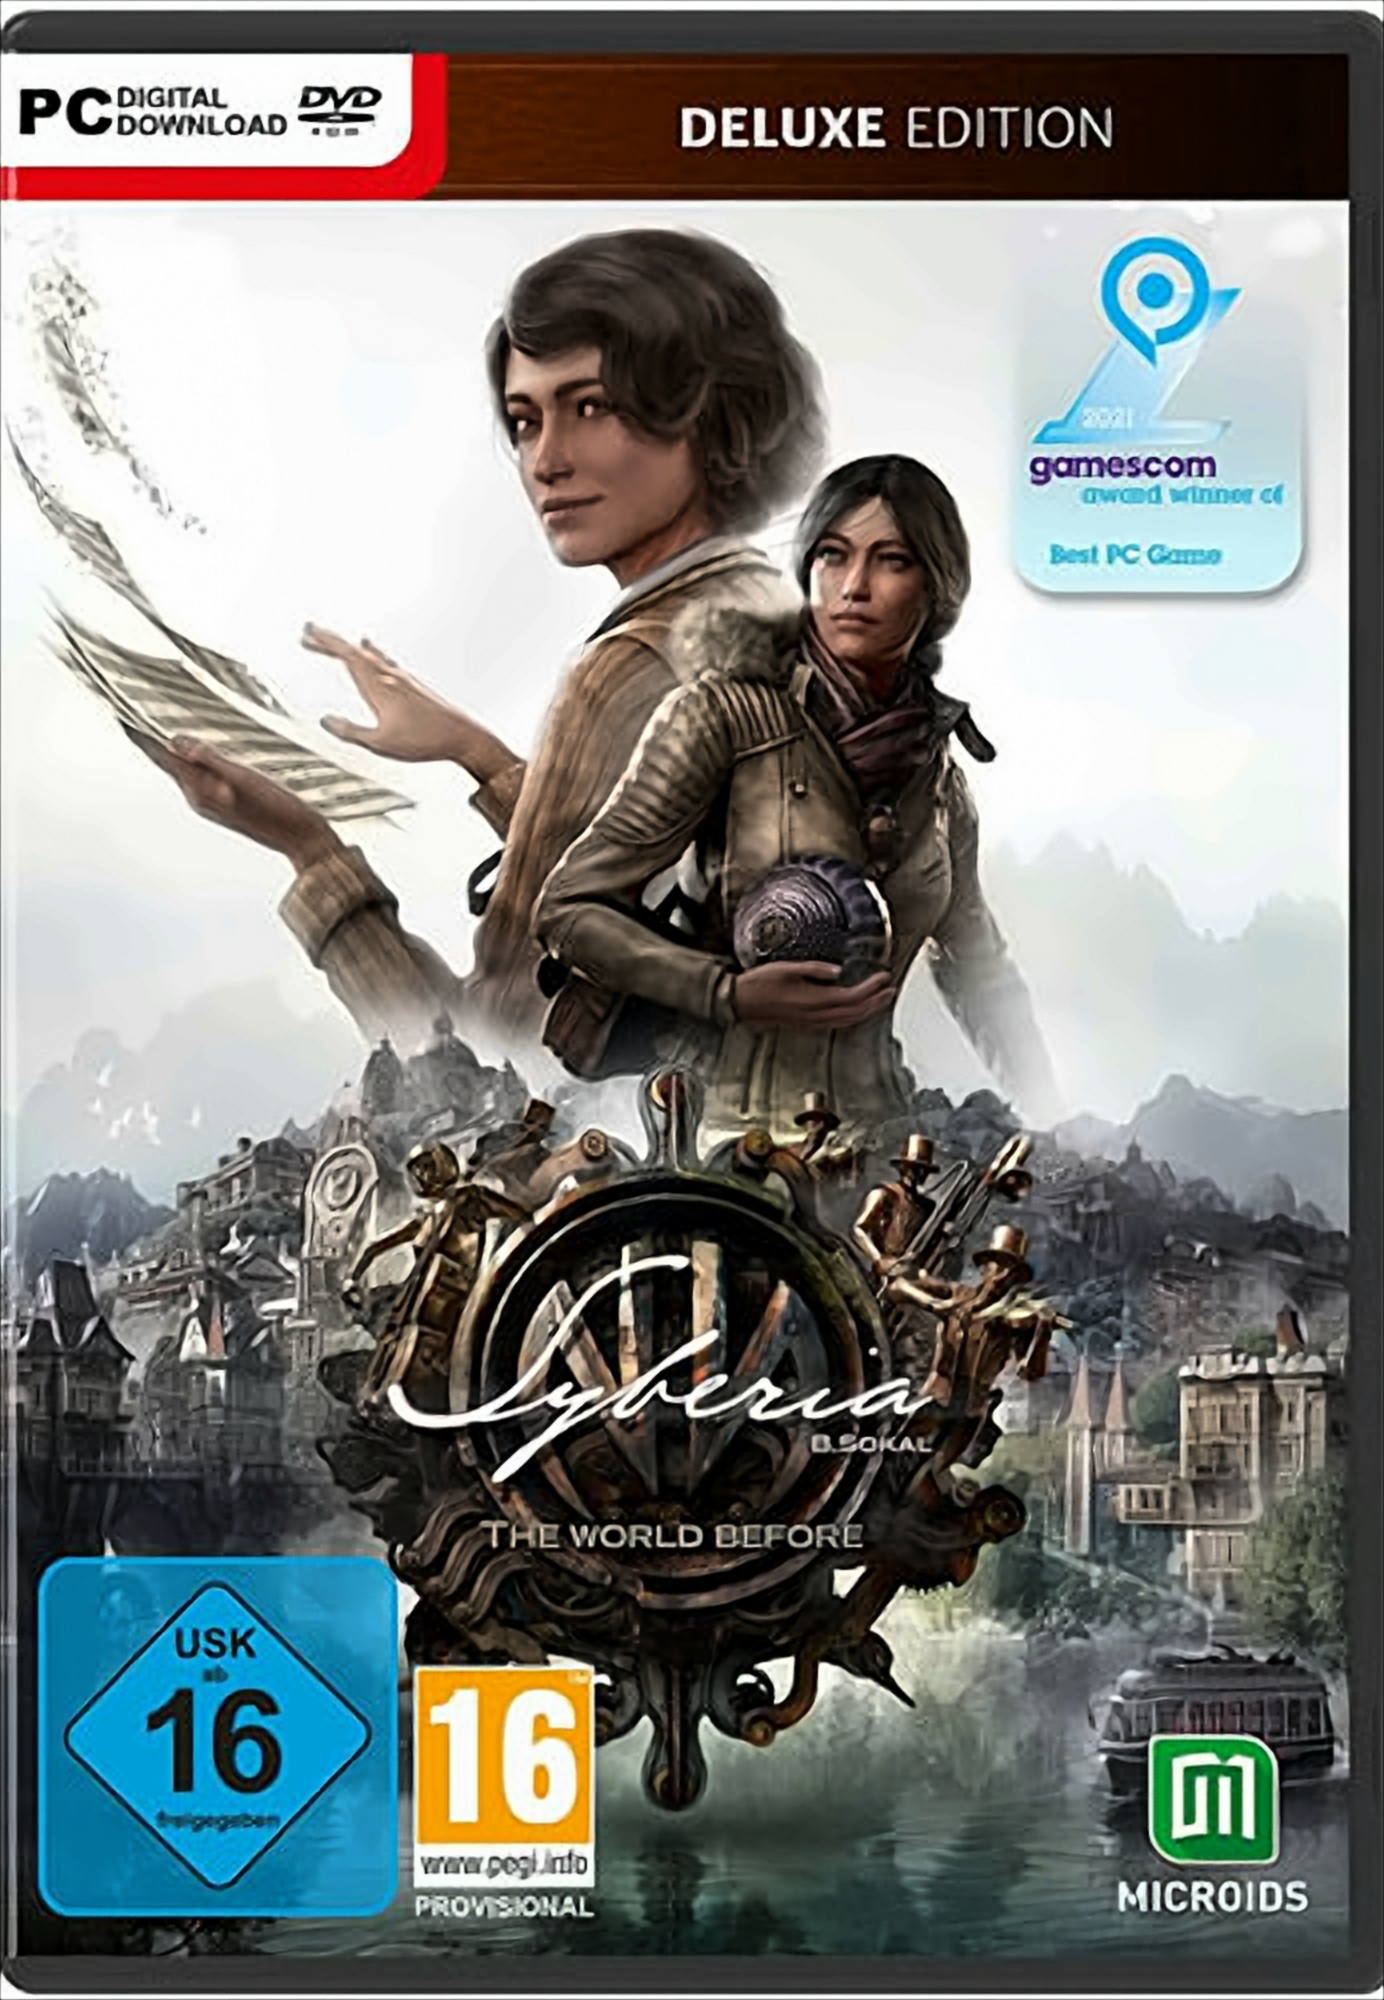 PC - [PC] Before DELUXE World The Syberia: